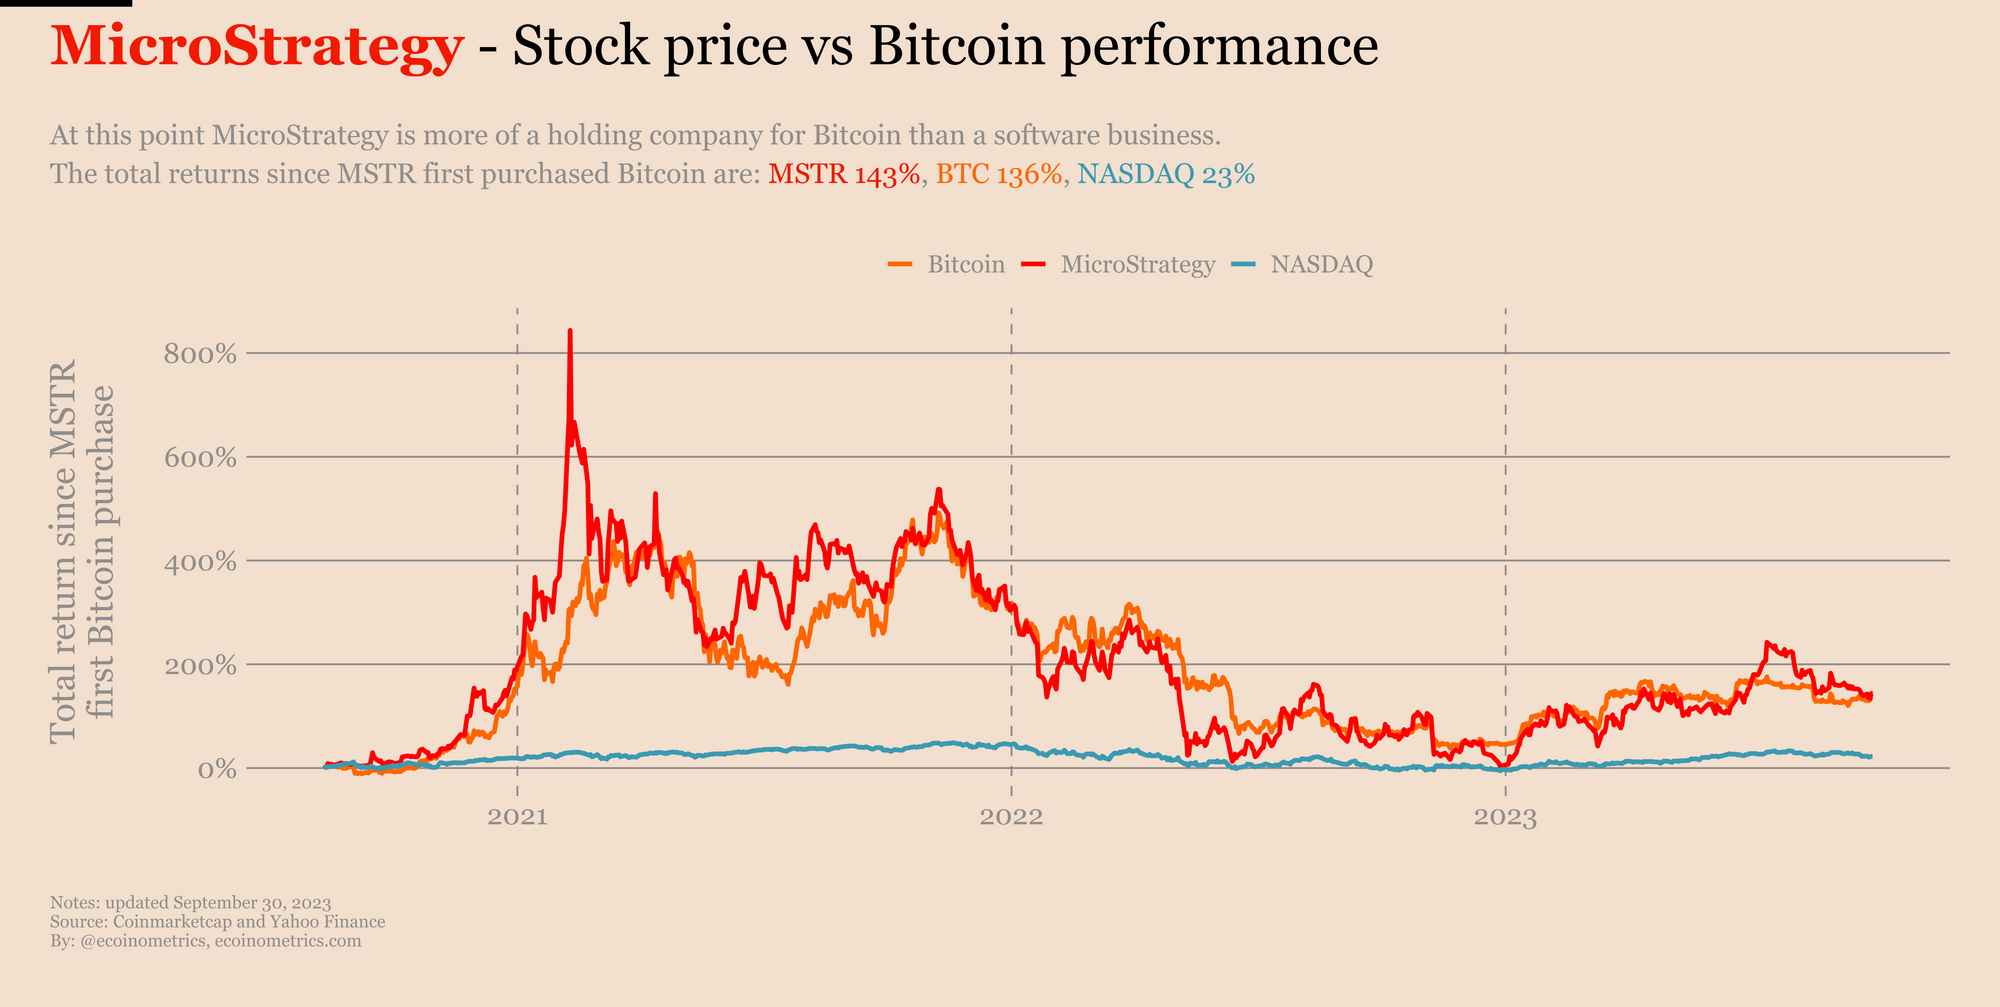 MicroStrategy stock returns compared to Bitcoin and the NASDAQ.